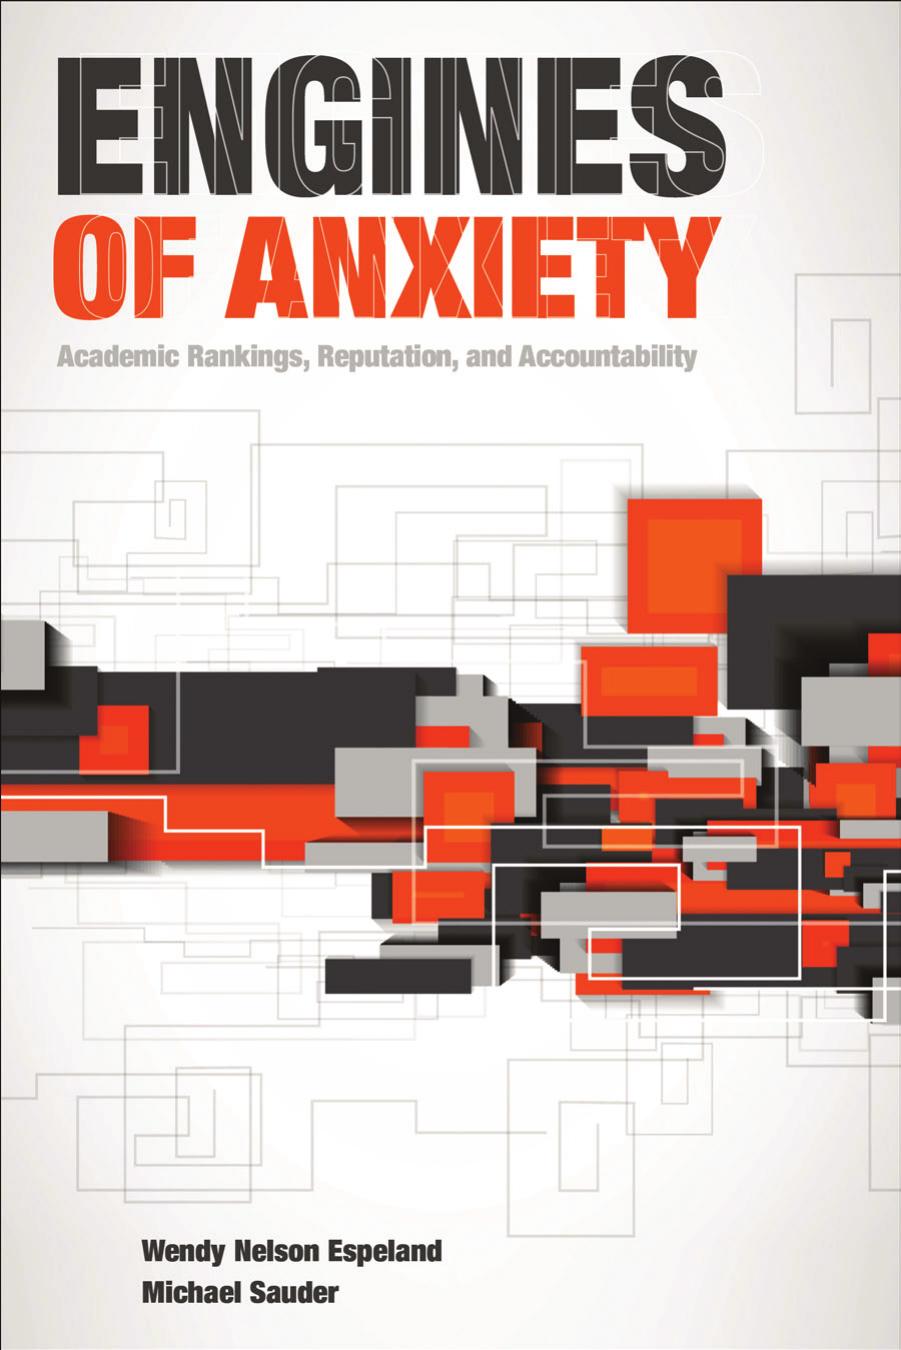 Engines of Anxiety: Academic Rankings, Reputation, and Accountability by Wendy Nelson Espeland and Michael Sauder